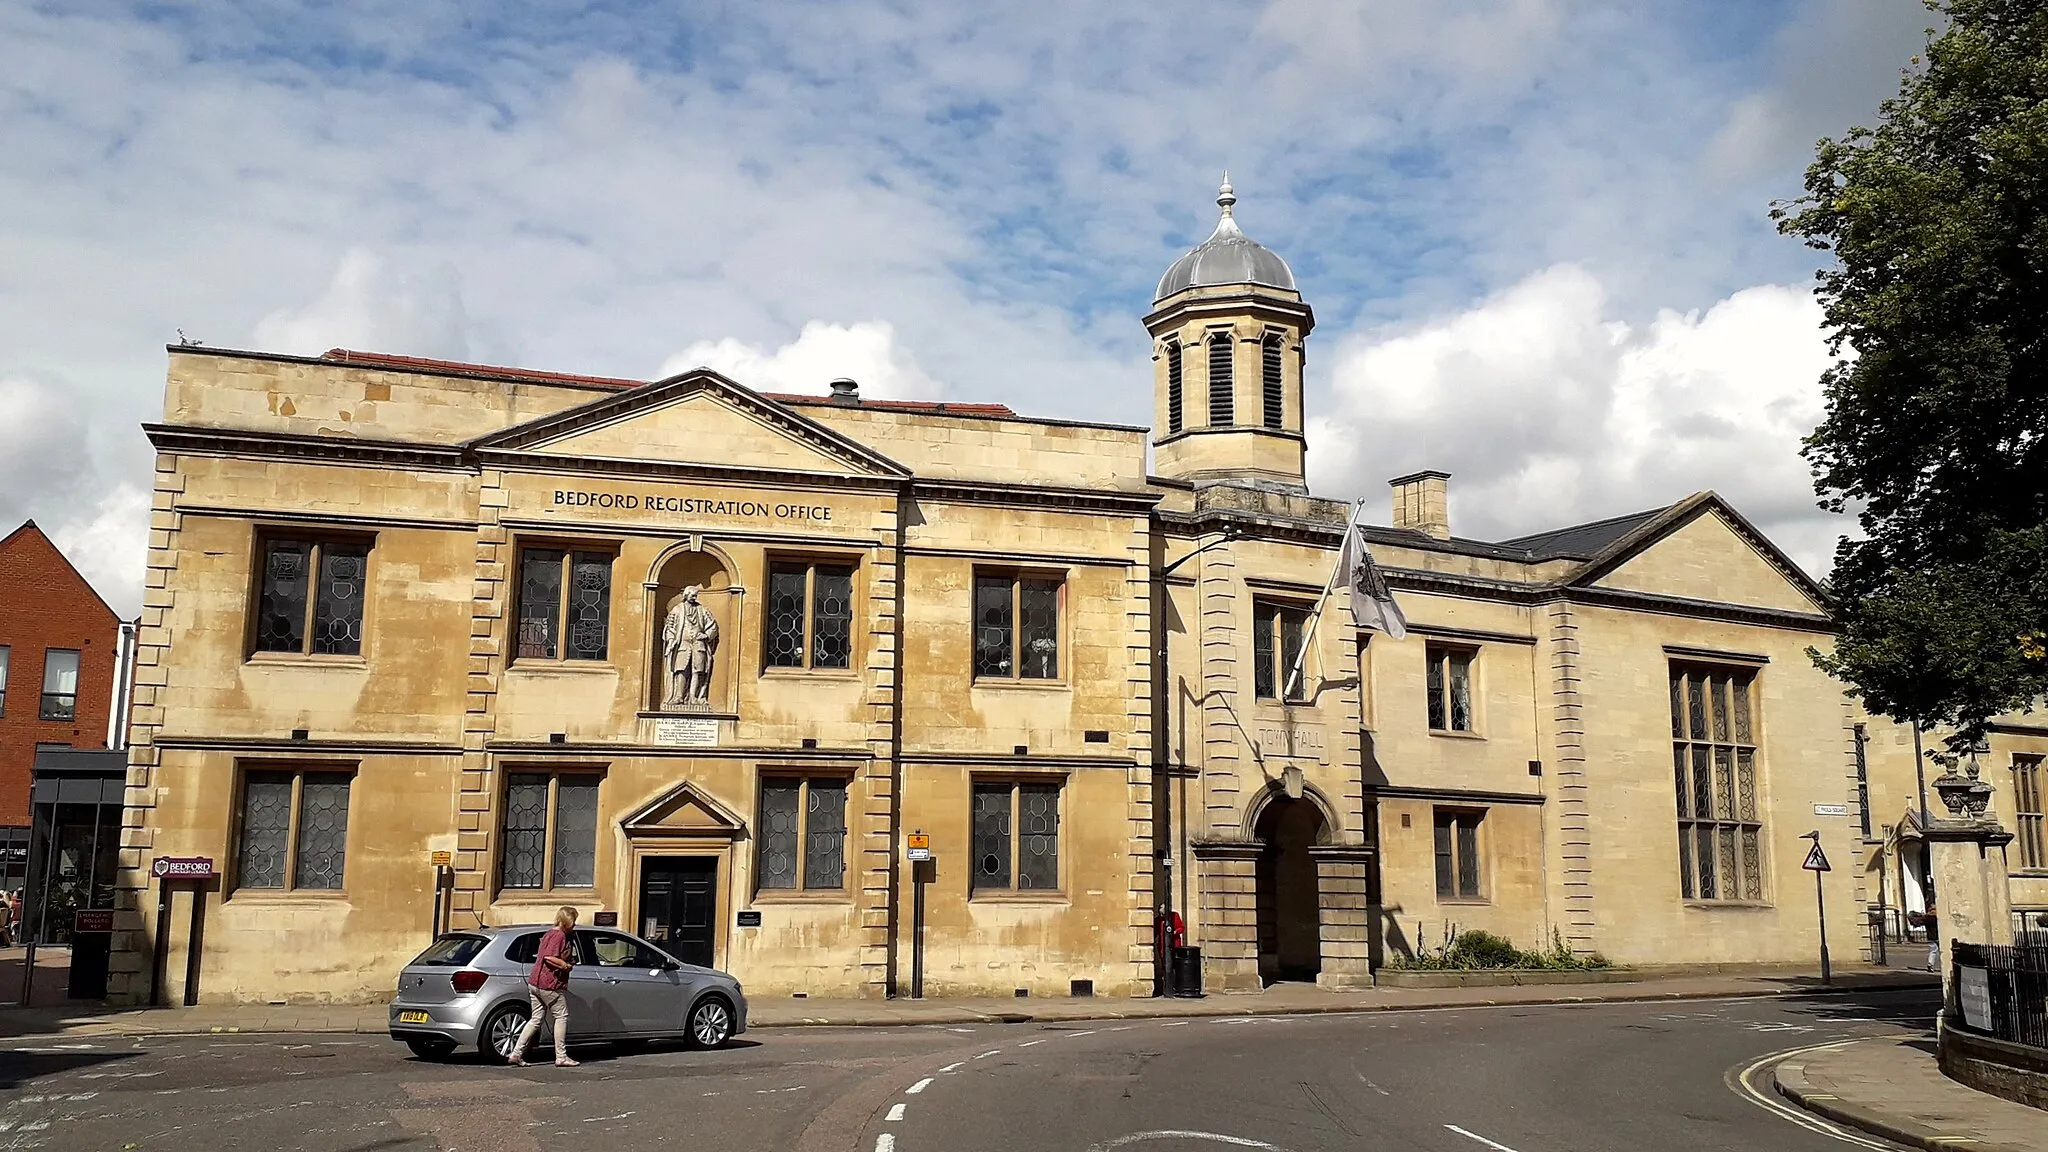 Photo showing: Earliest parts built c. 1550 as part of Bedford Grammar School, bought by council and converted to Town Hall 1892. Council moved to Borough Hall (formerly County Hall) 2009, old Town Hall now used as register office.